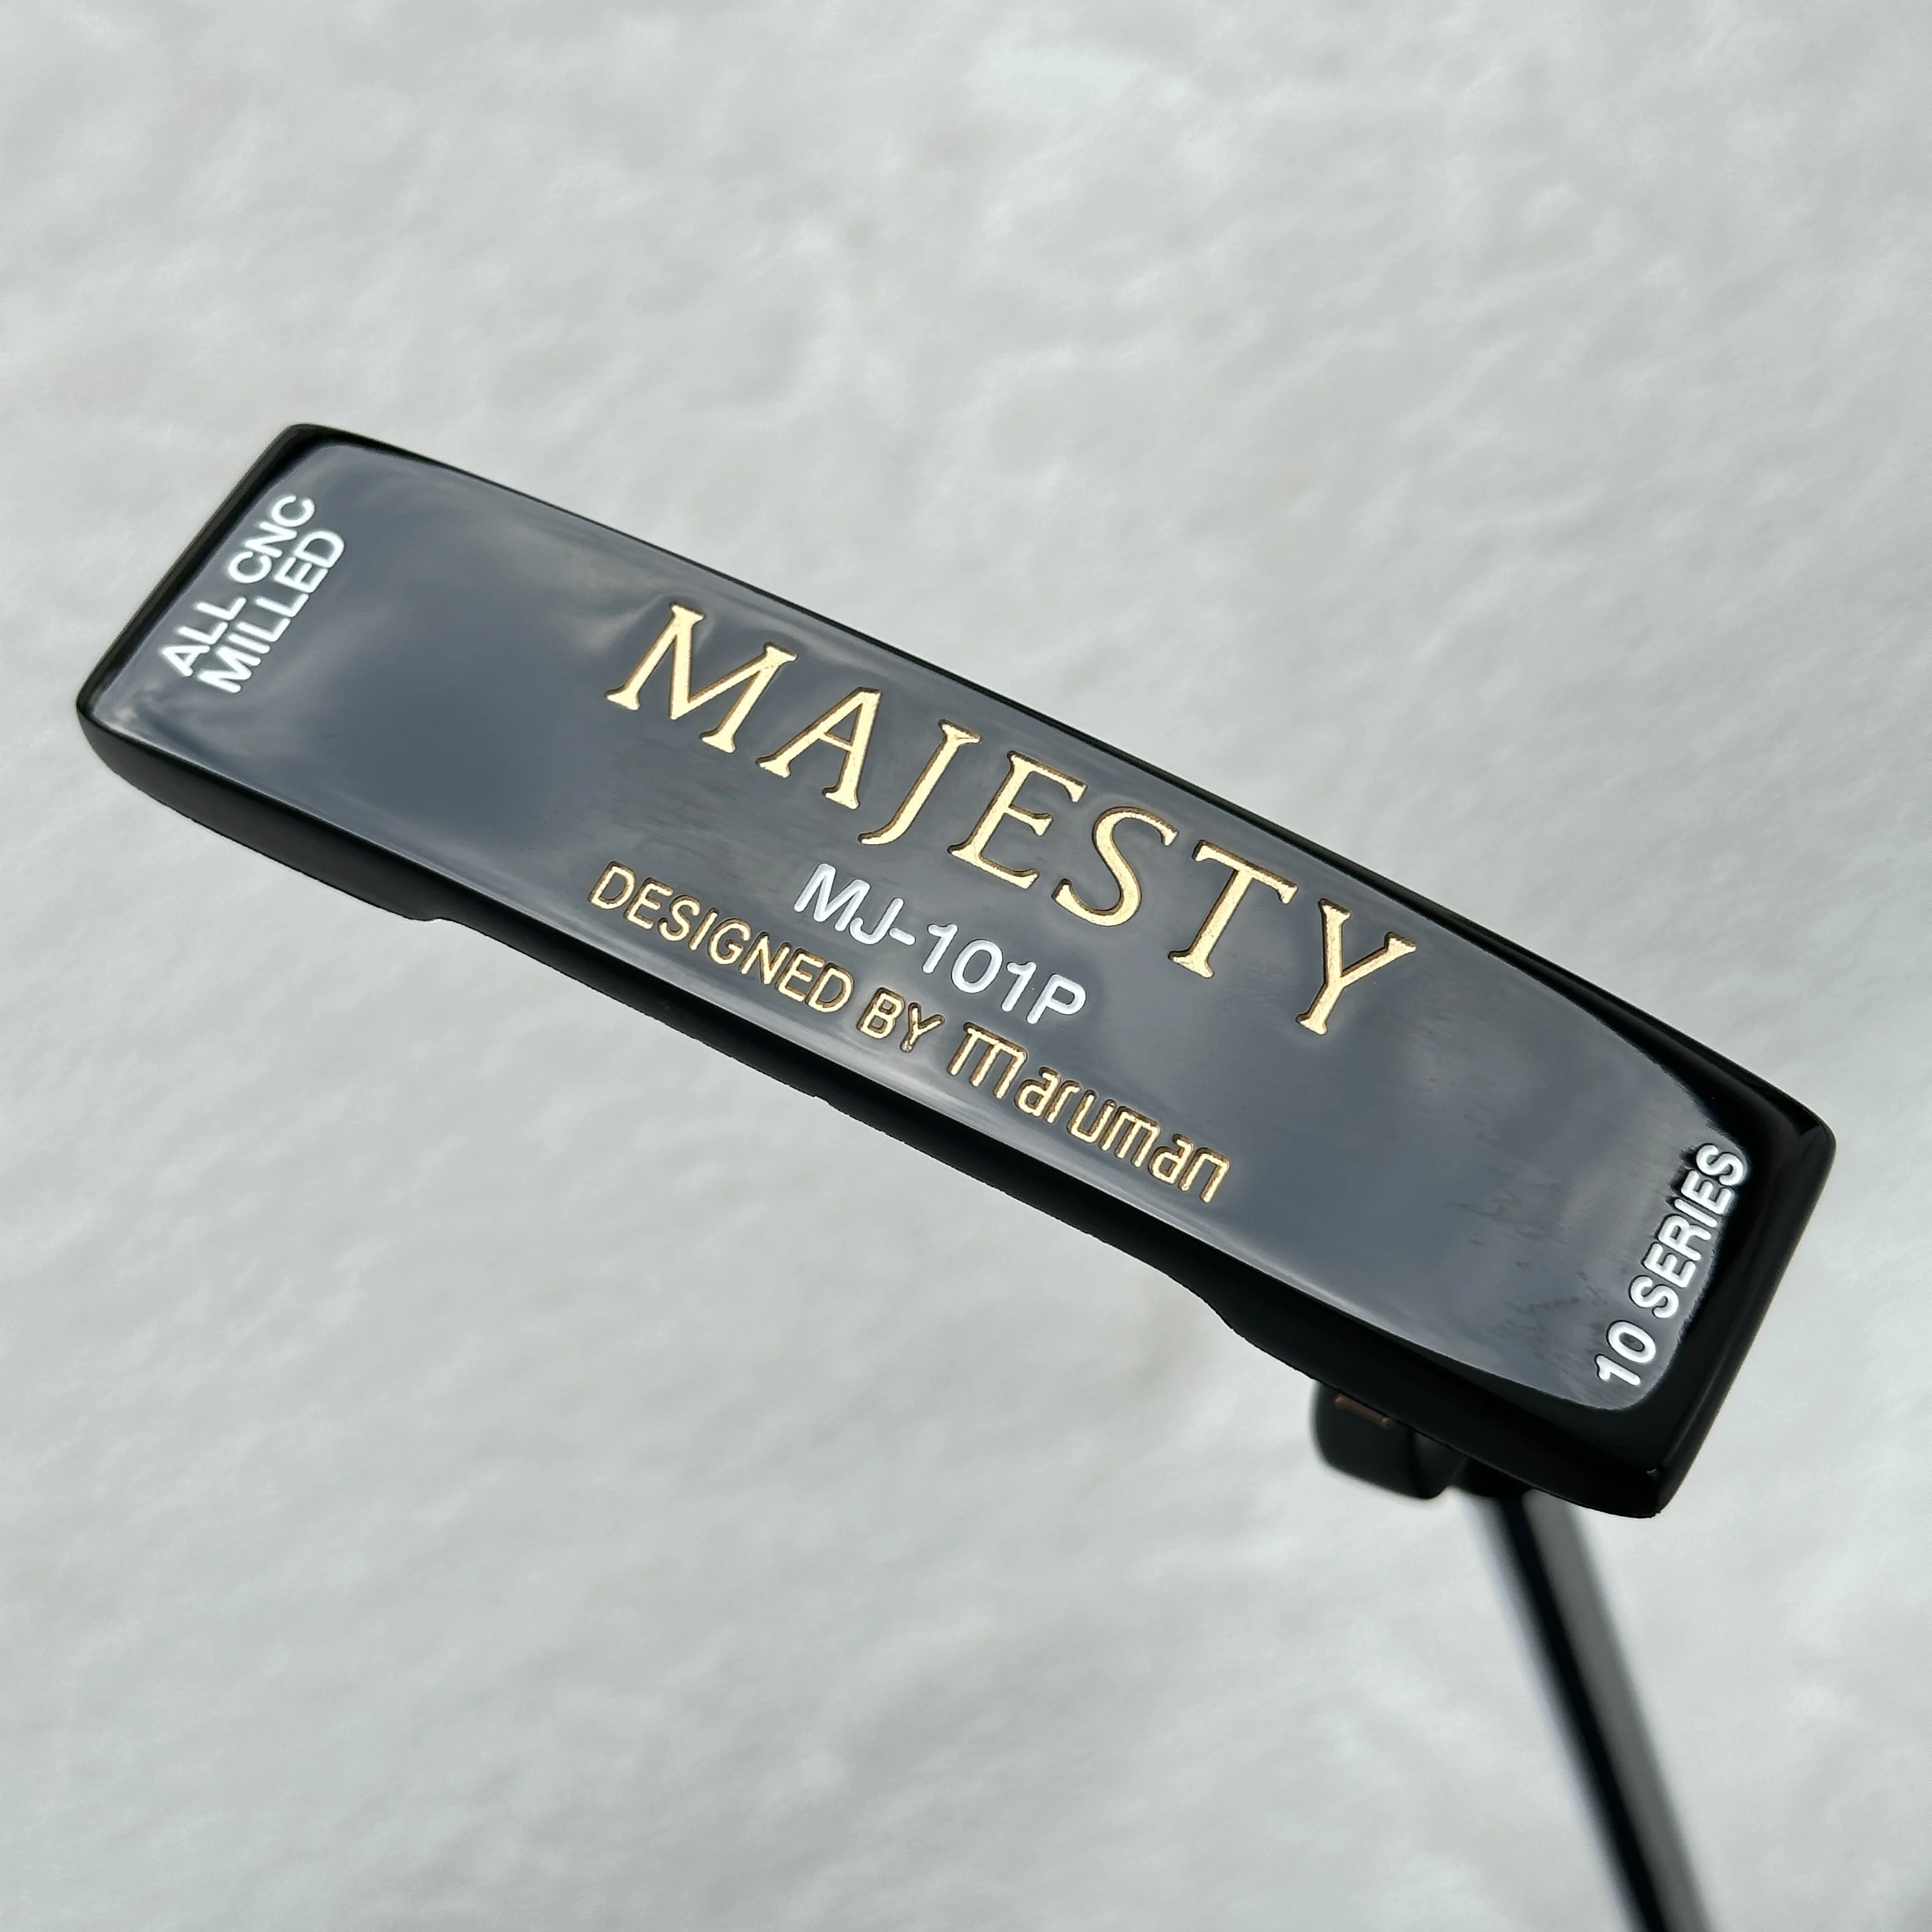 

Men's Golf Clubs majesty mj-101P Golf Putter 33/34/35 Inch Steel Shaft with Head Cover